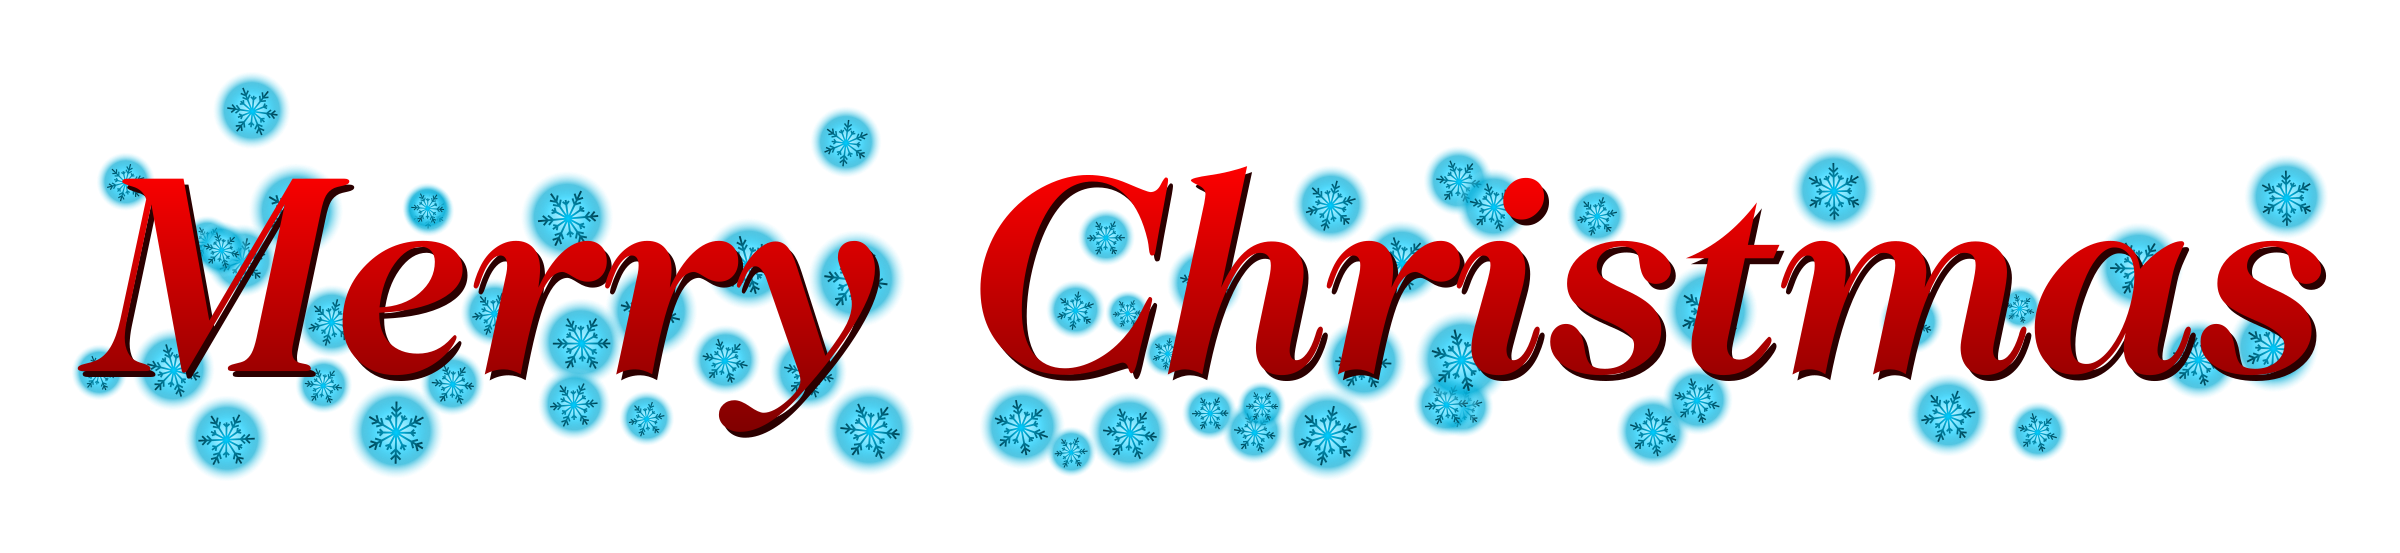 clipart christmas banner - photo #8